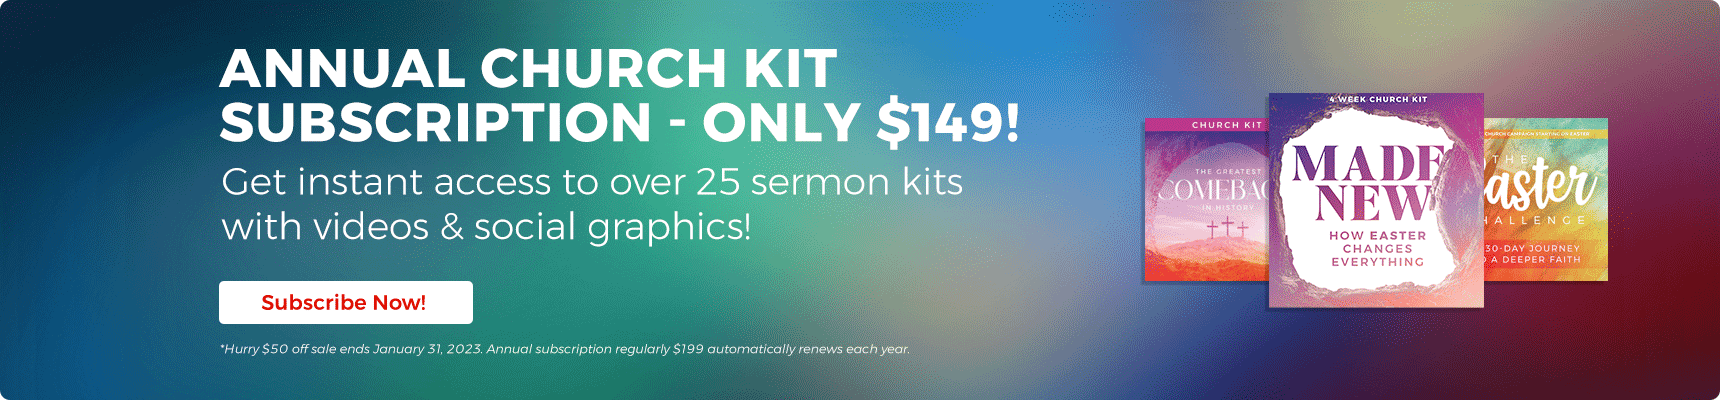 Unlock your church's outreach potential with over 50 church kits and videos, advent, easter, back to church. All church kits and videos only $199.